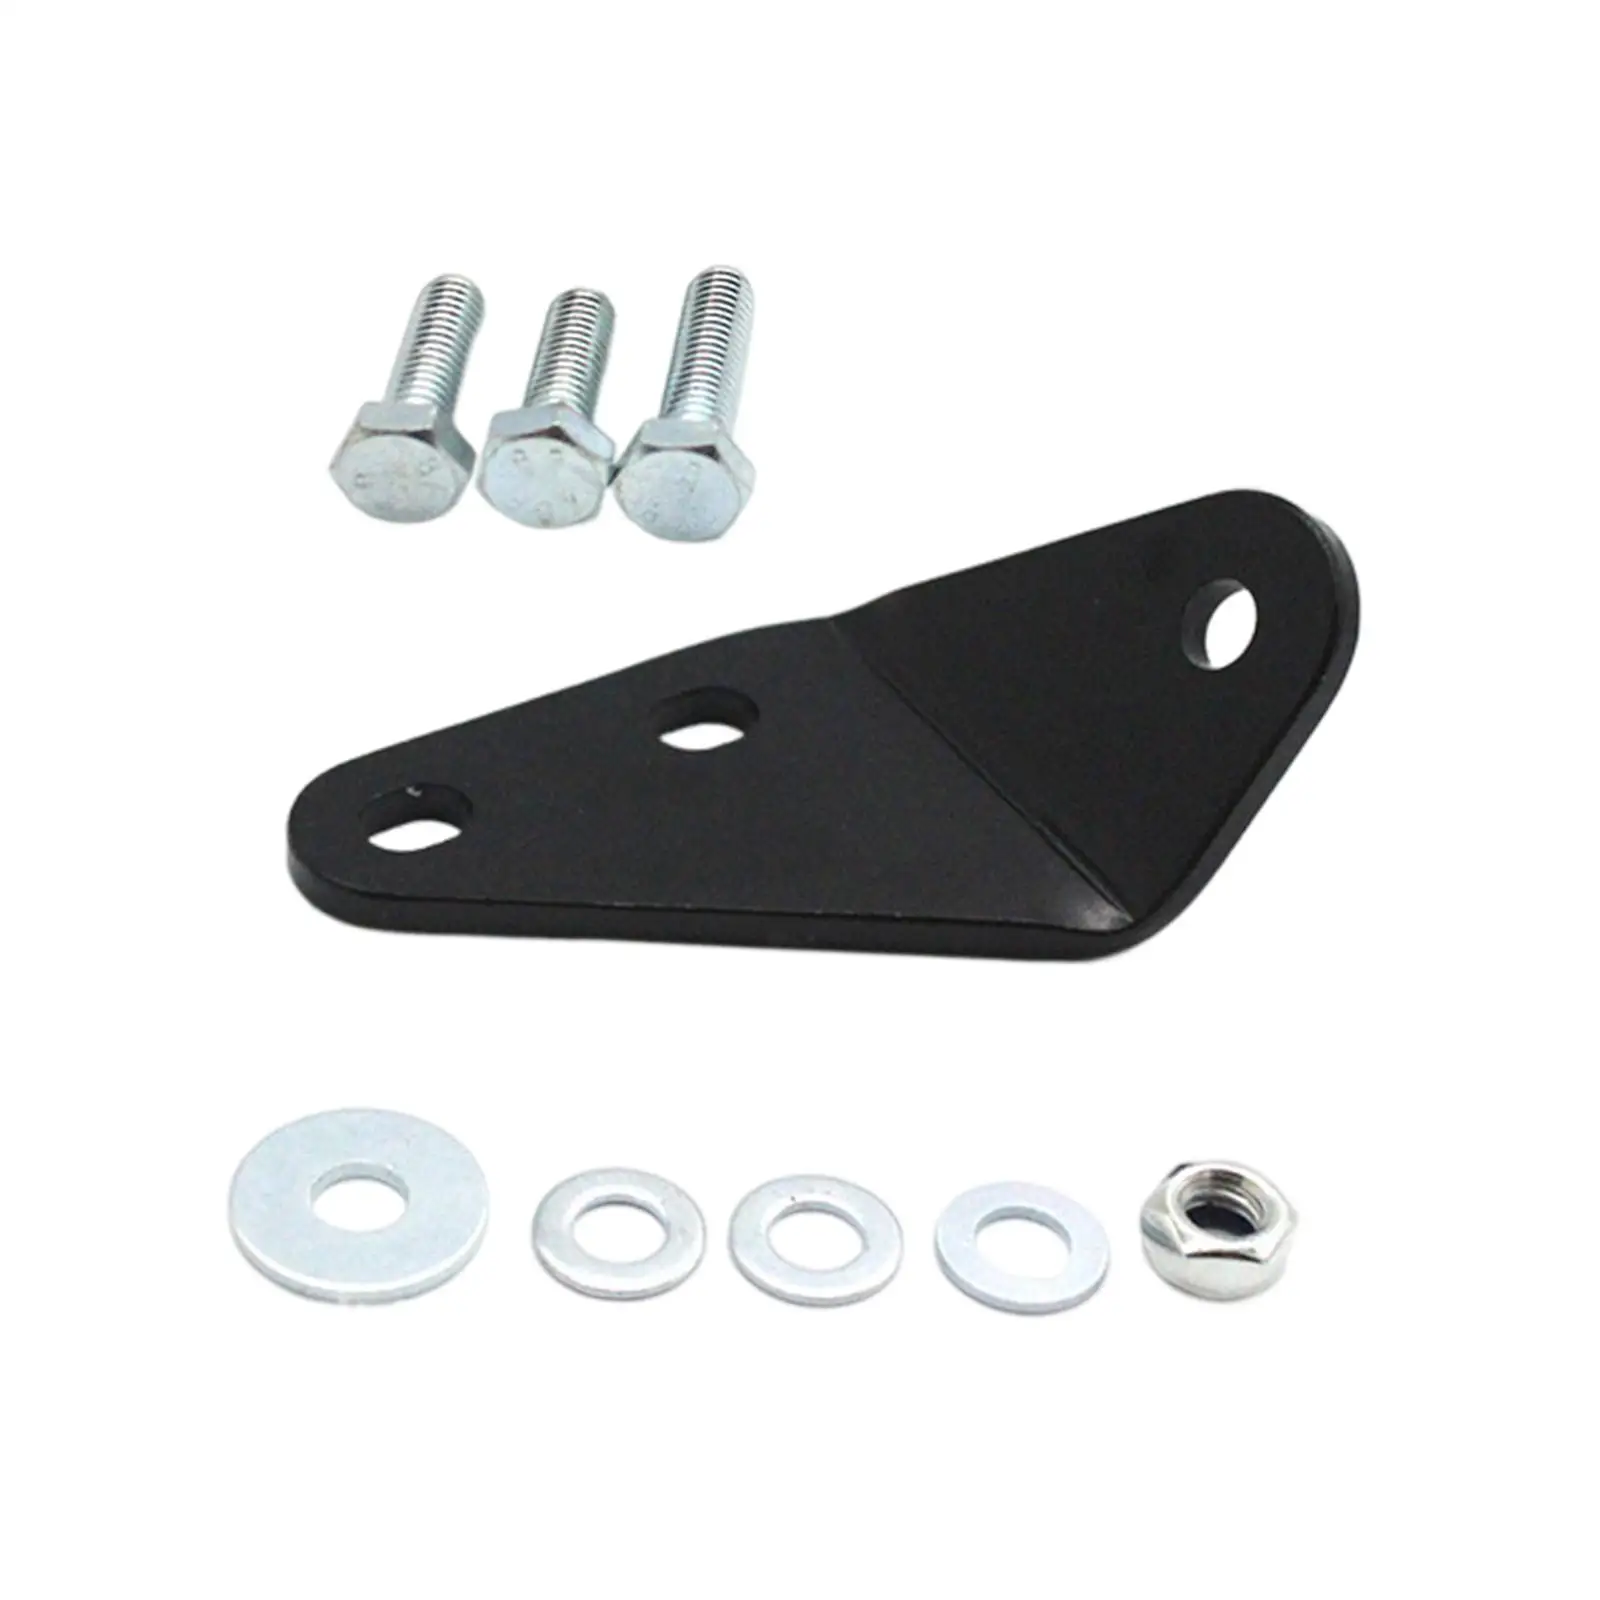 Clutch Pedal Repair Bracket Kit Sturdy Replace Parts for Volkswagen T4